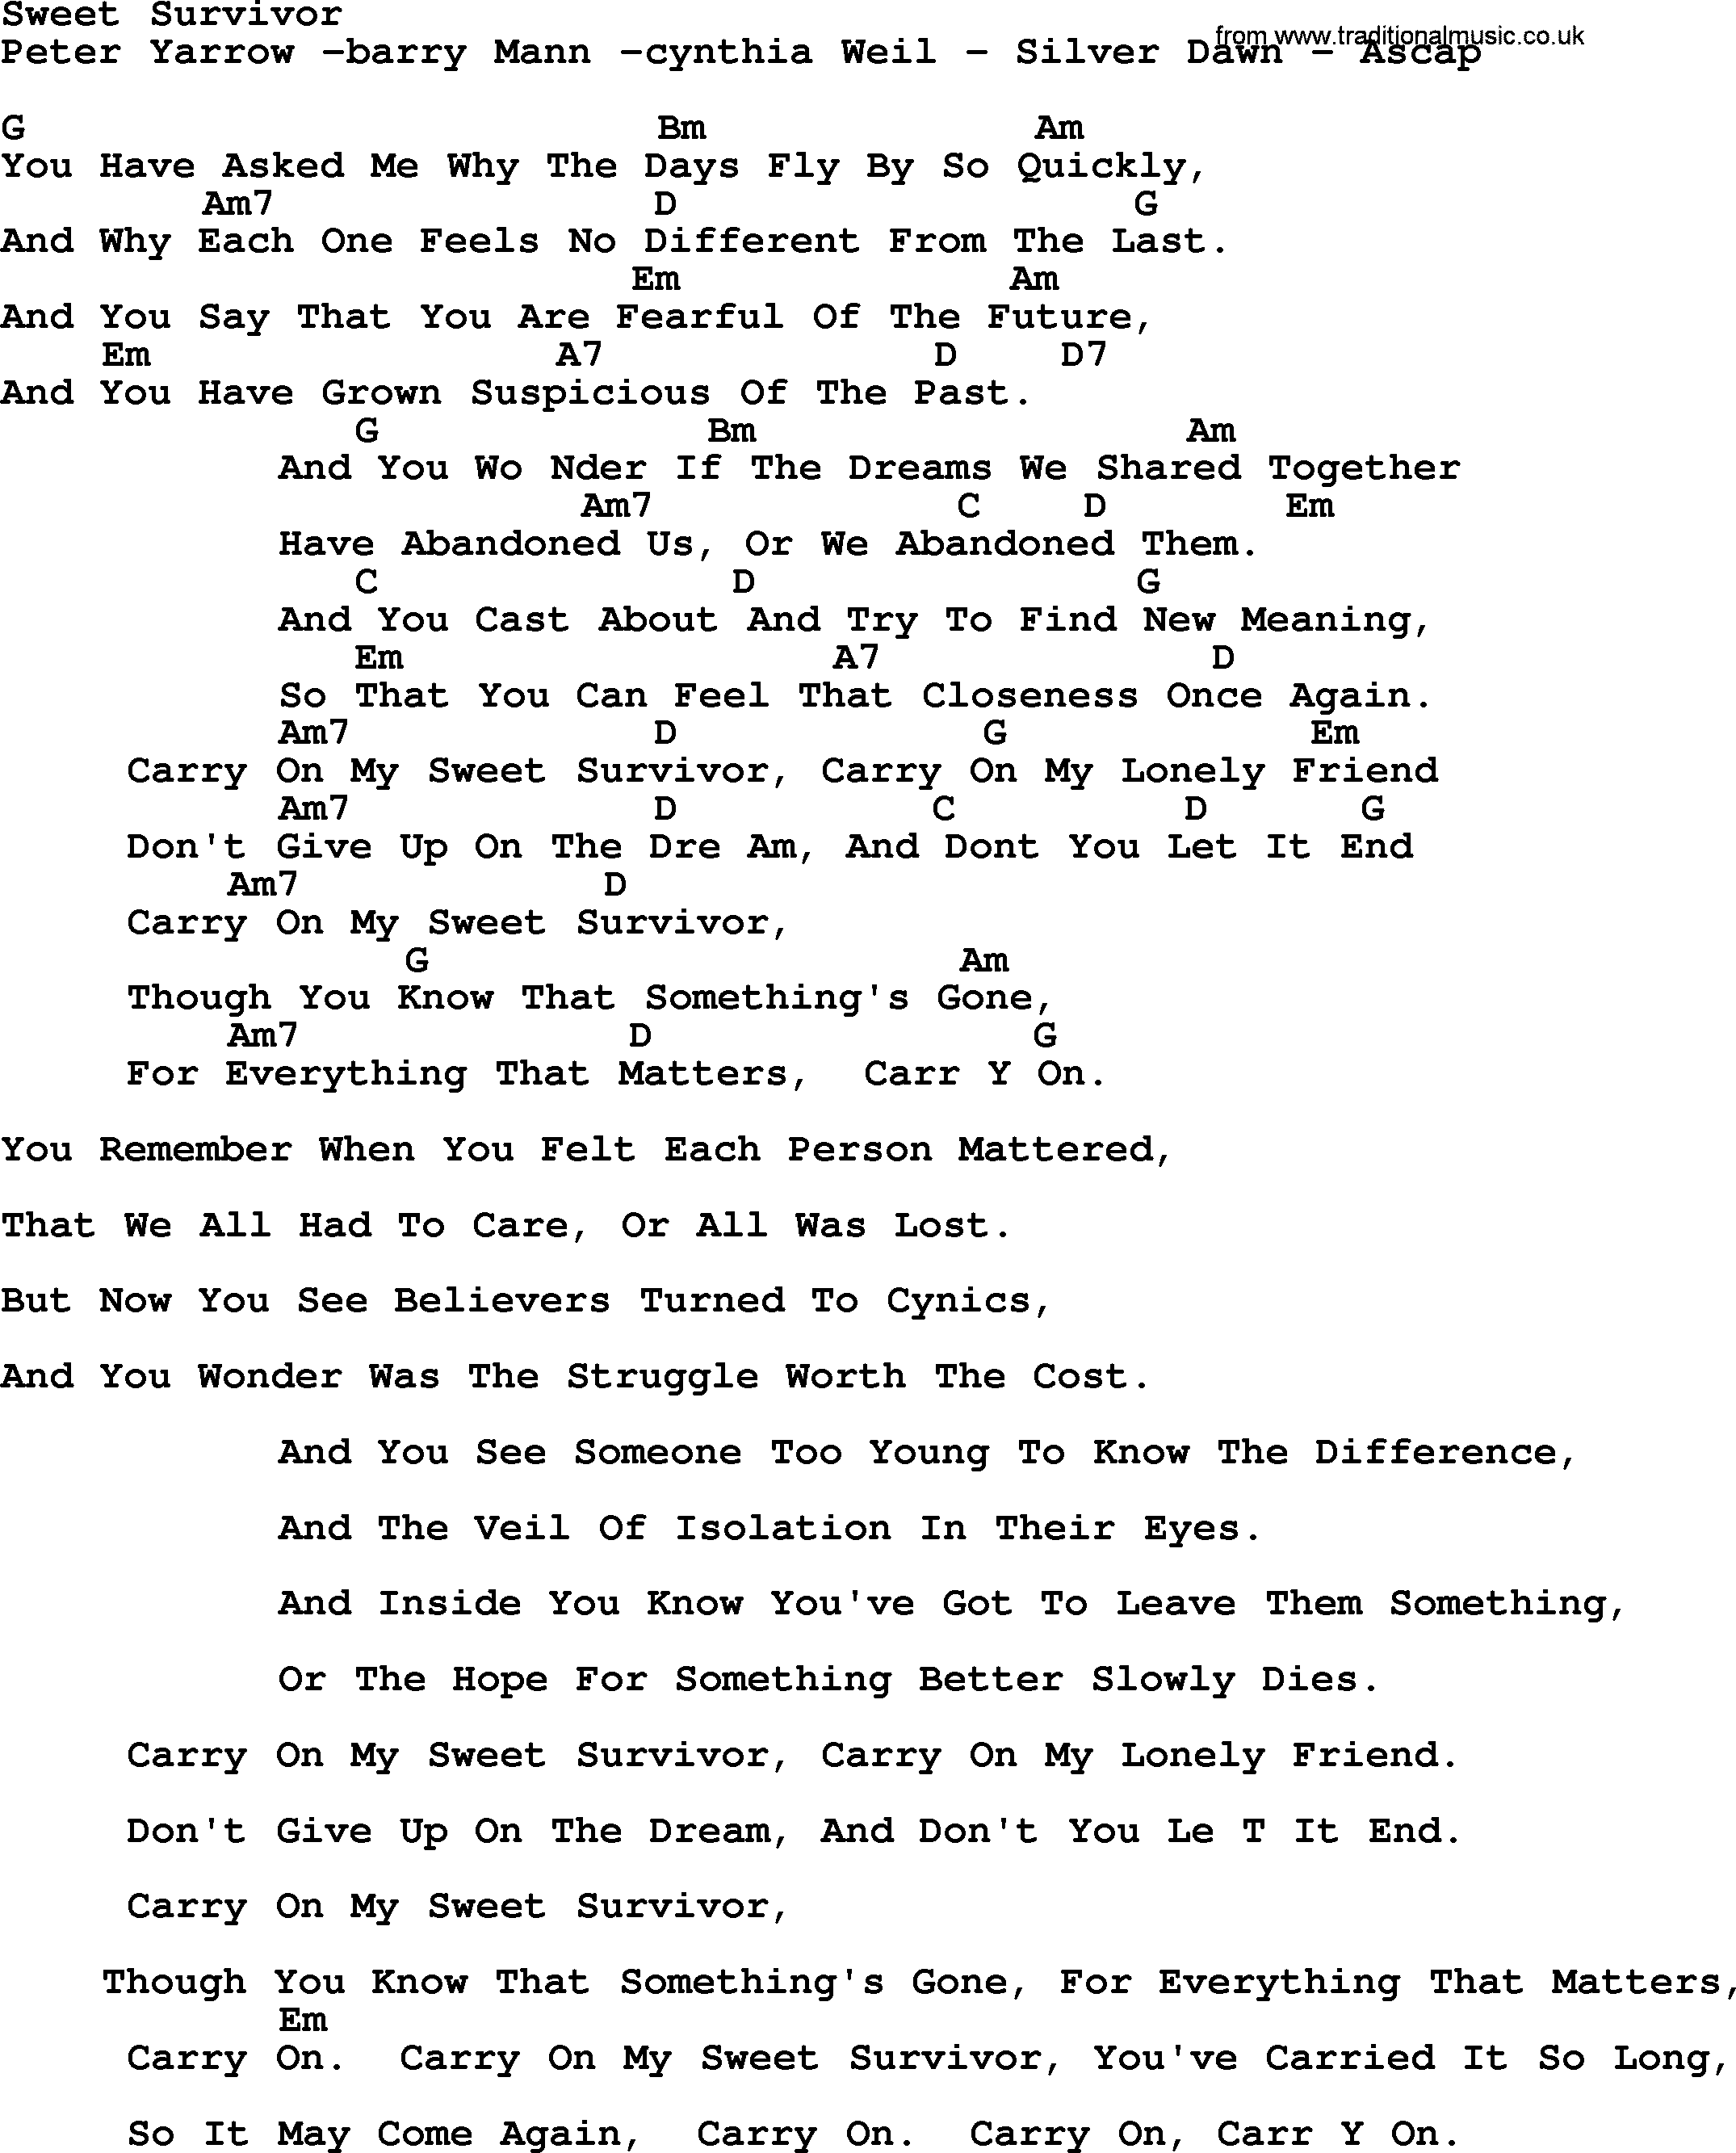 Peter, Paul and Mary song Sweet Survivor, lyrics and chords